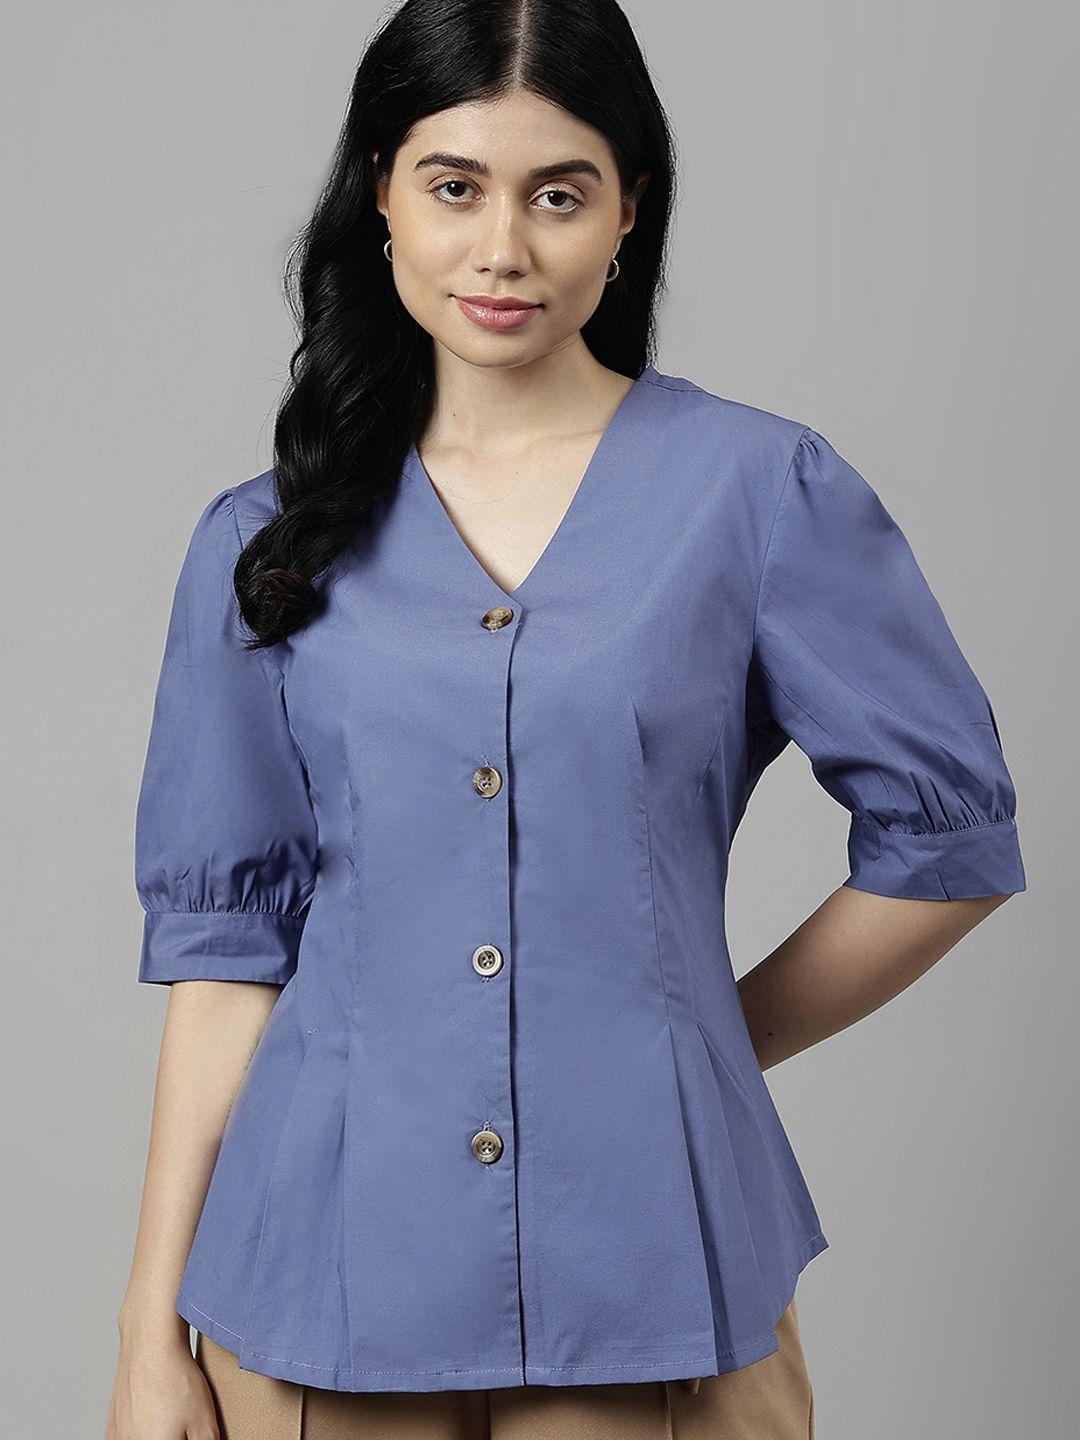 hancock v-neck pure cotton pleated detail formal shirt style top